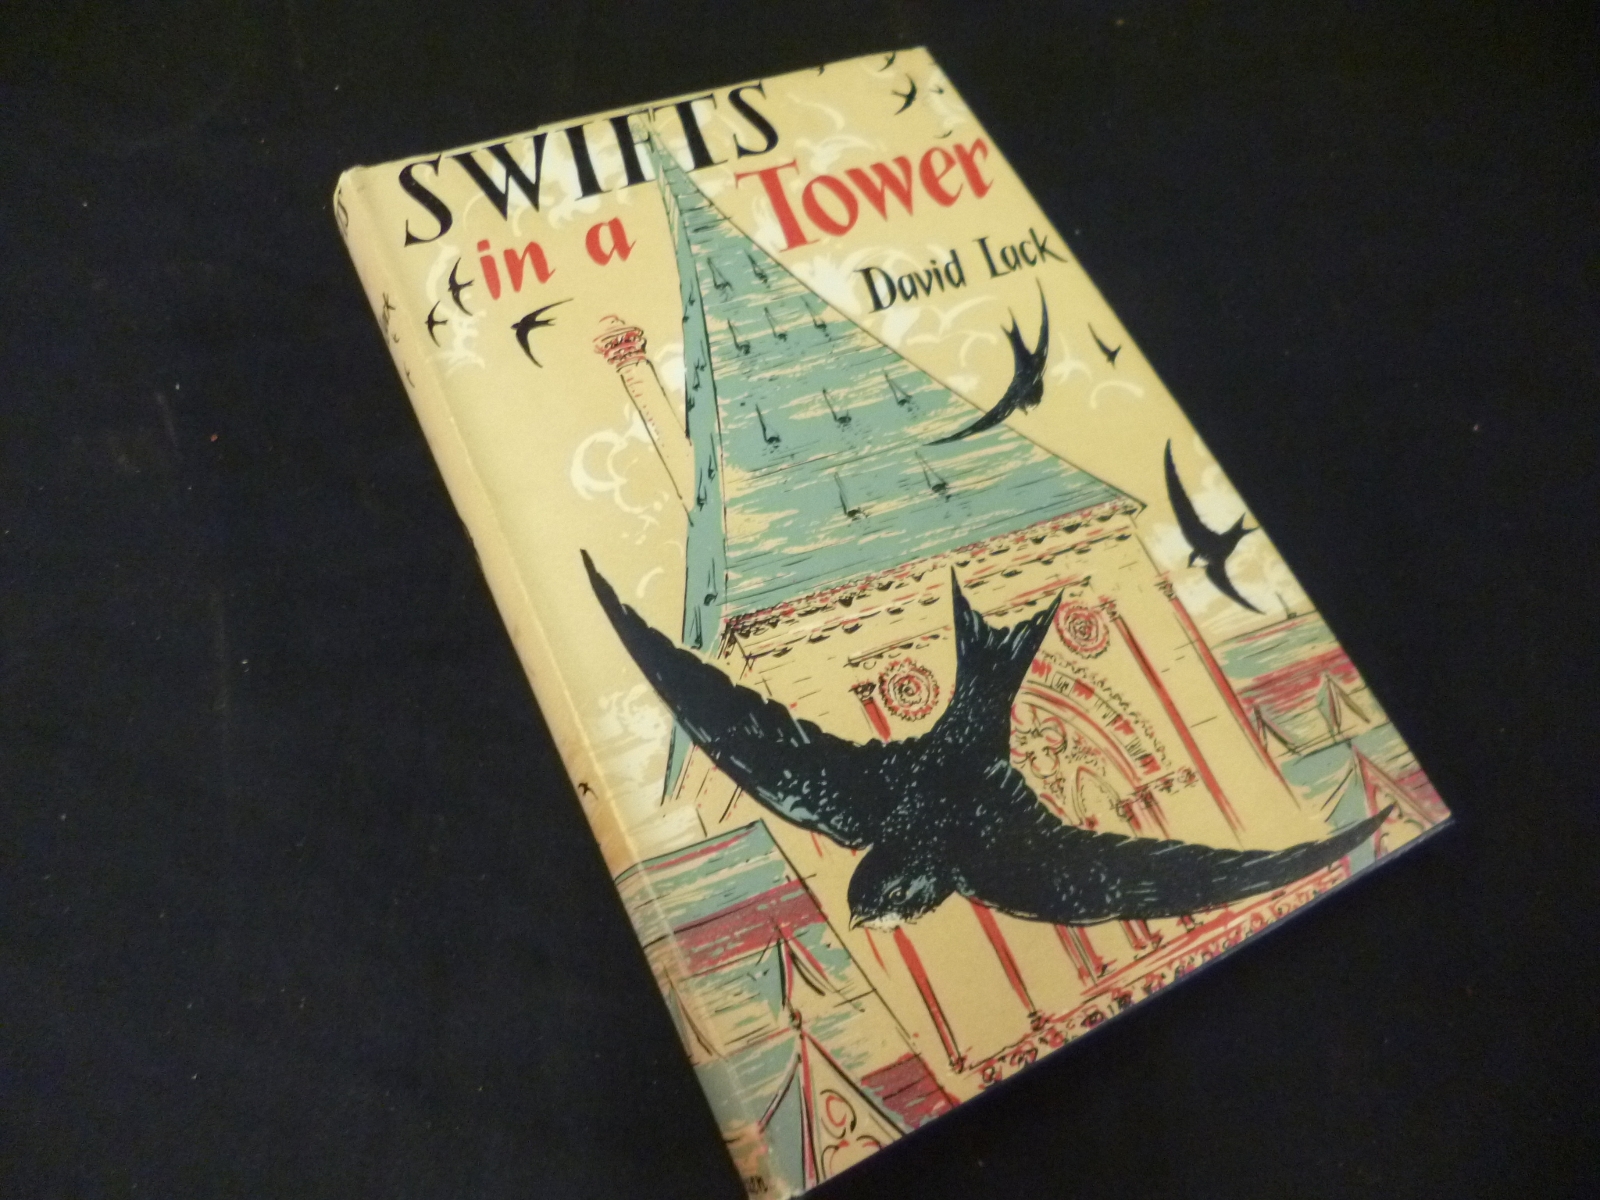 DAVID LACK: SWIFTS IN A TOWER, 1956, 1st edn, orig cl, d/w